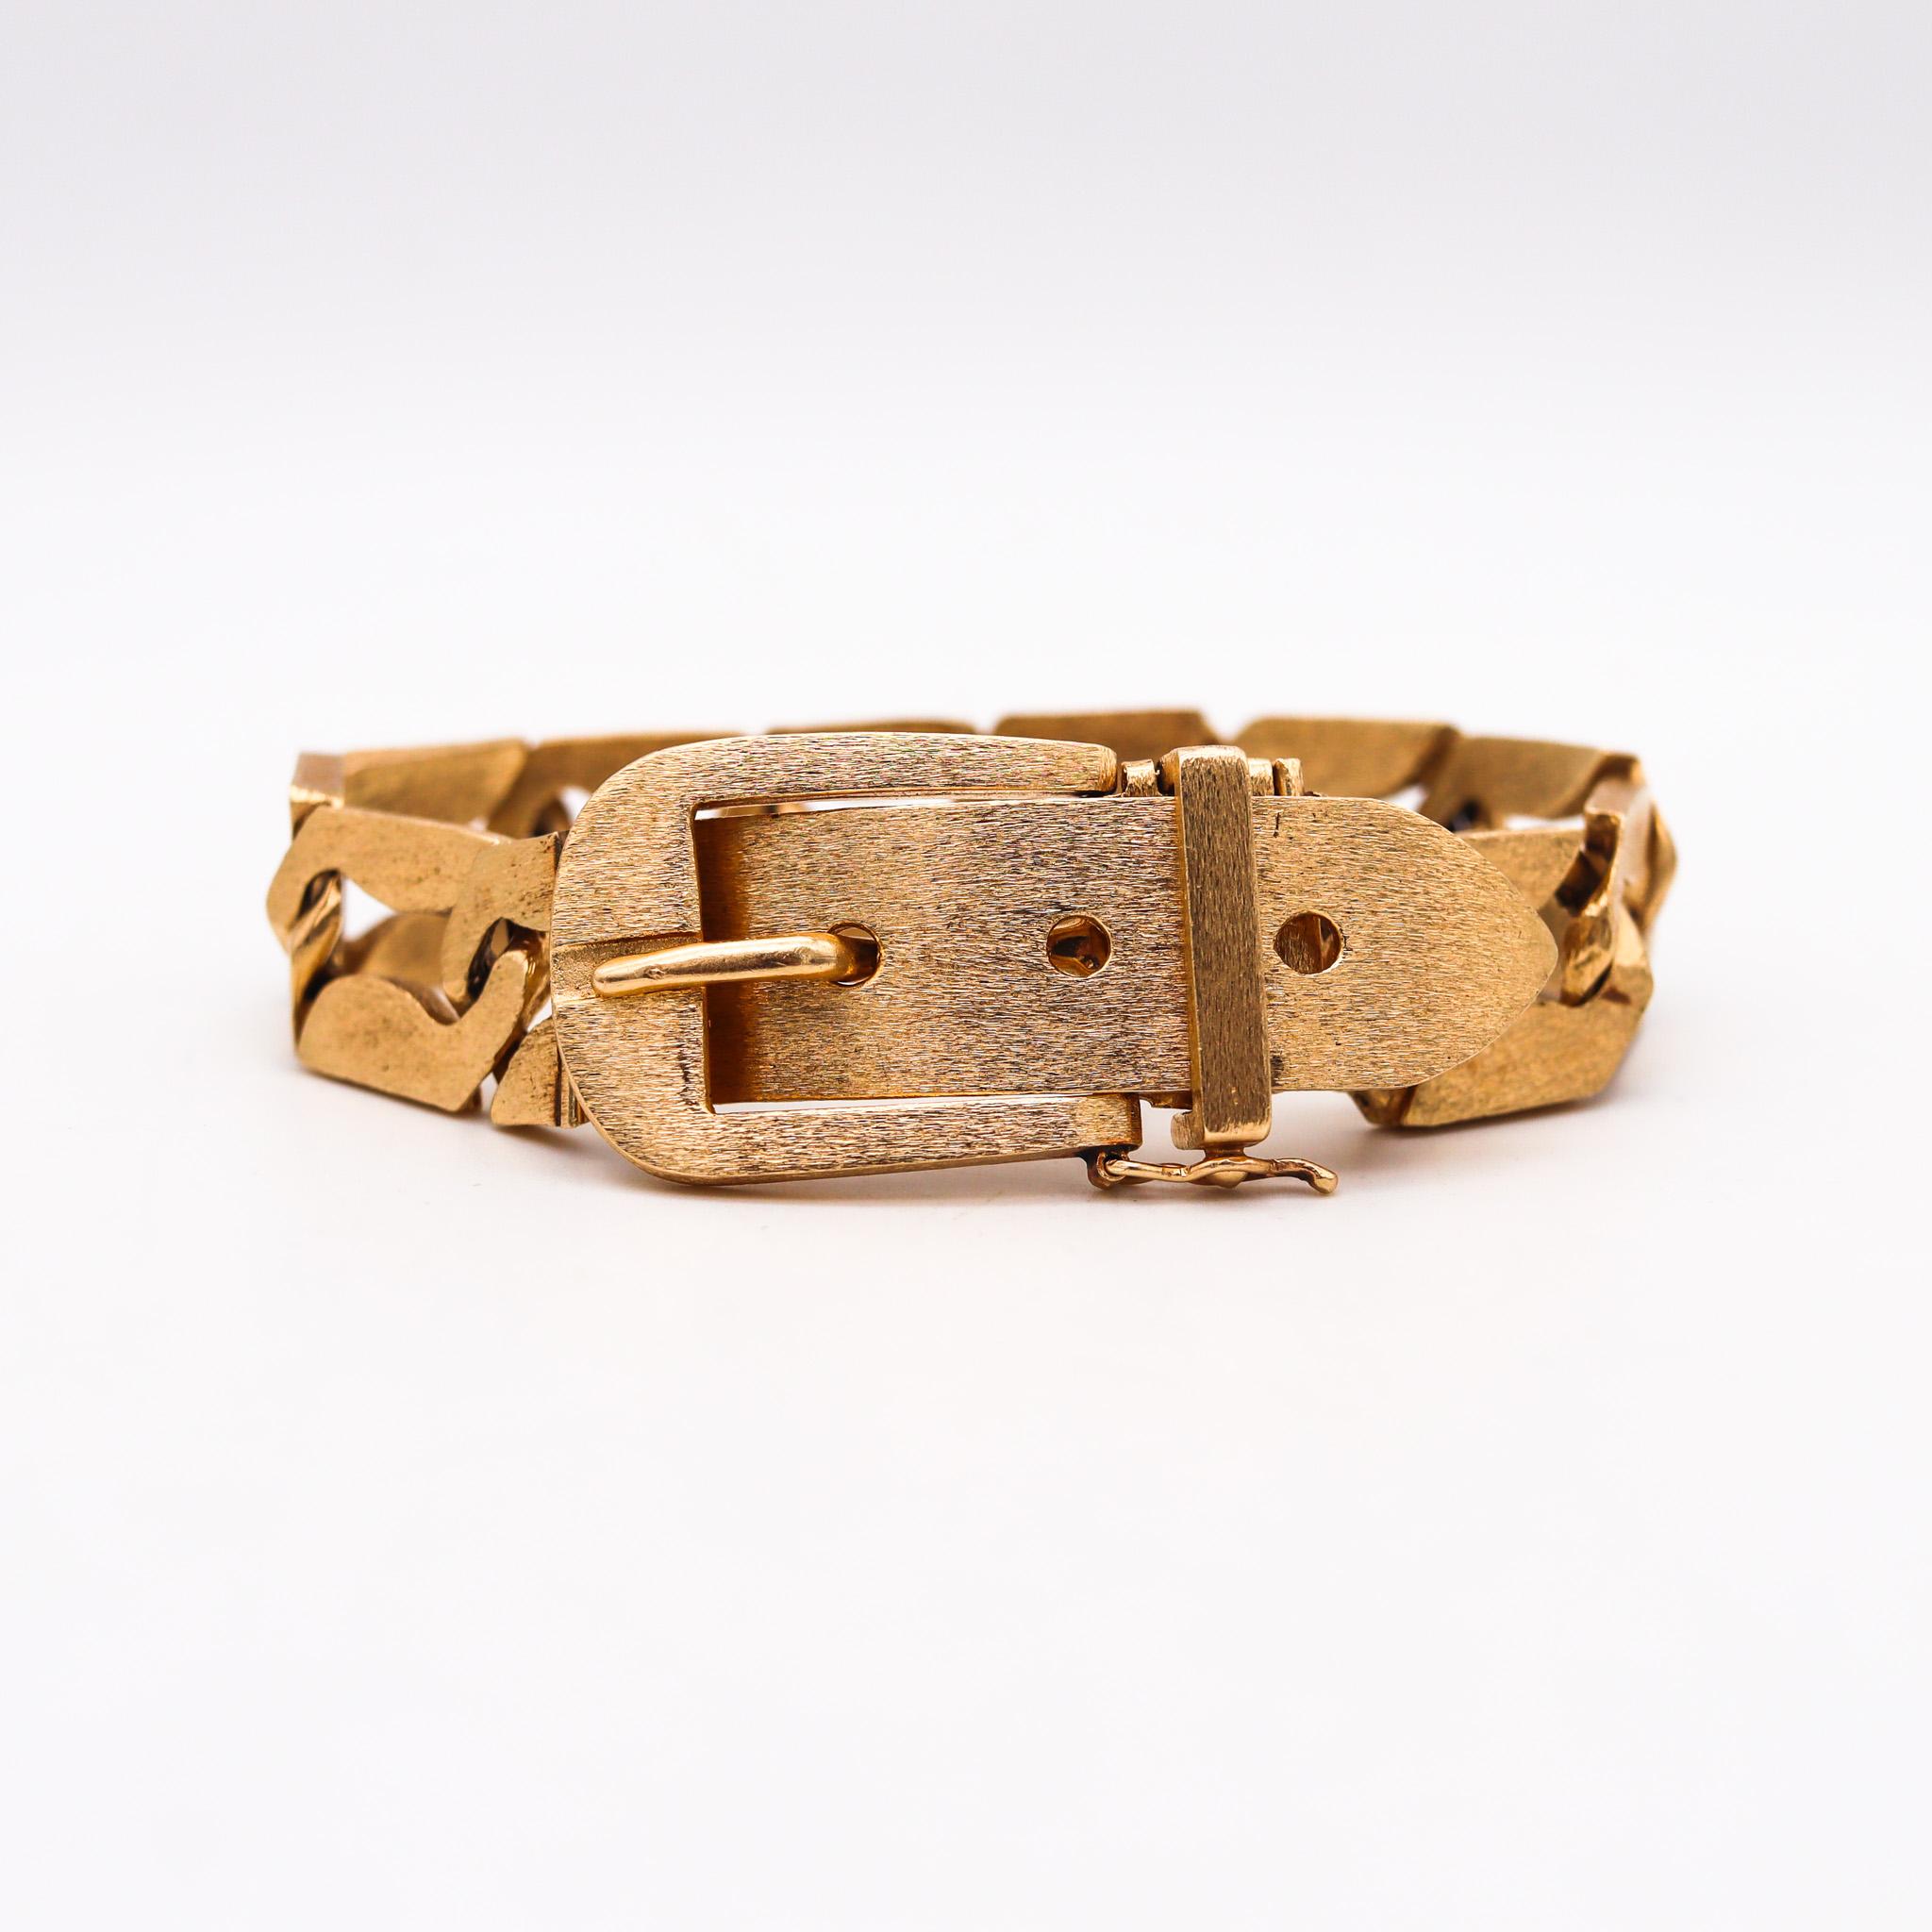 Buckle belt bracelet designed by Louis Fiessler.

An unusual buckle-belt bracelet, created by the famous German goldsmith and designer Louis Fiessler, back in the 1970's. This vintage bracelet was crafted in solid yellow gold of 14 karats with